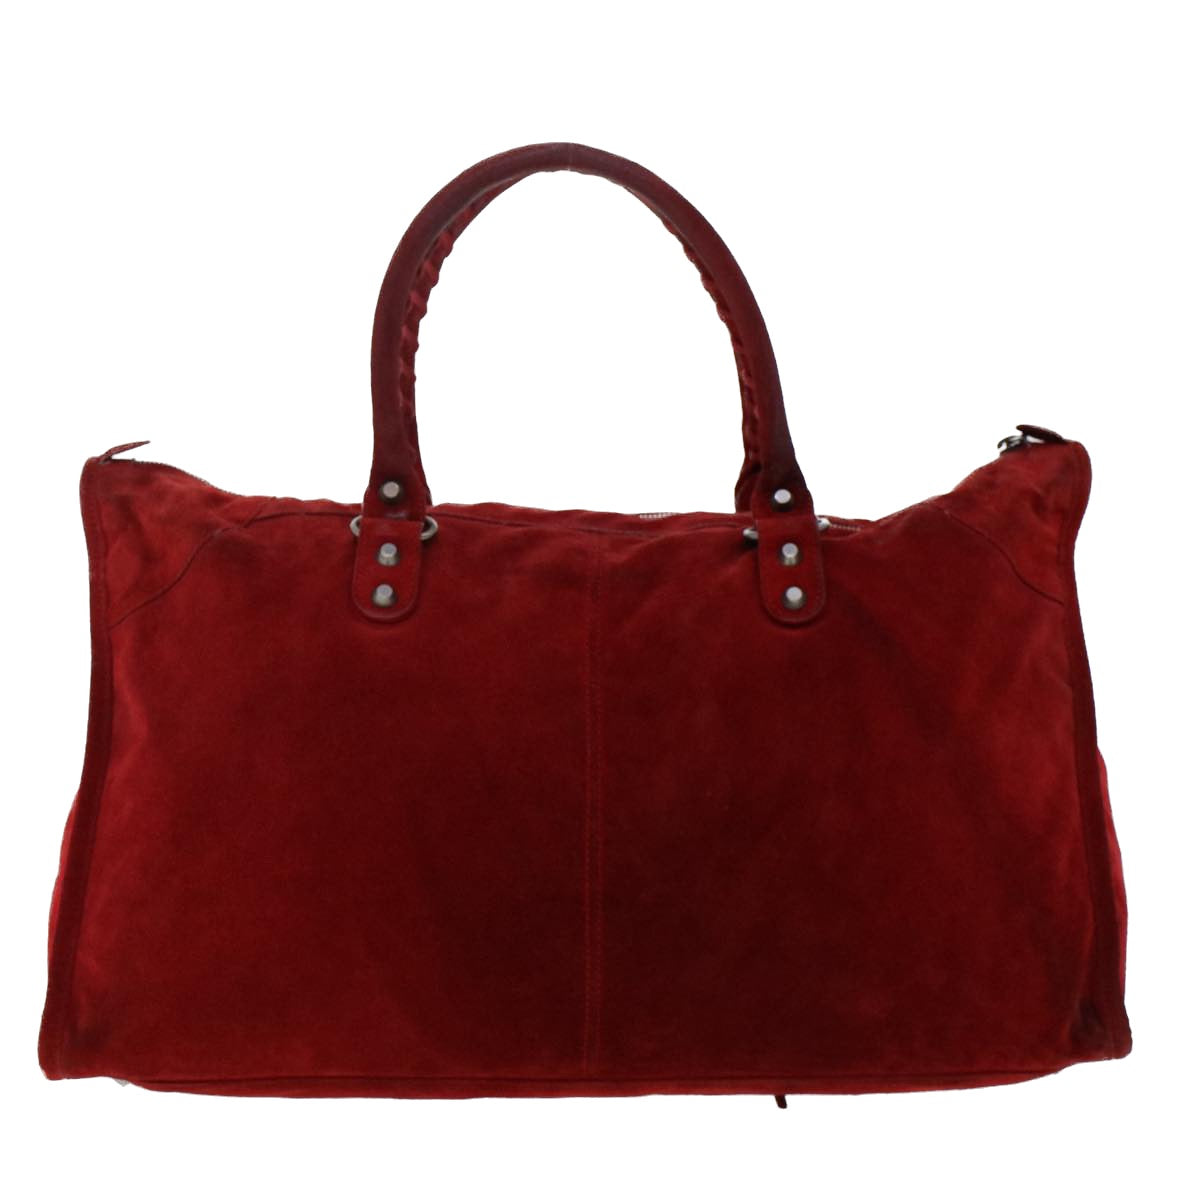 BALENCIAGA The Work Hand Bag Suede Red Auth 49776